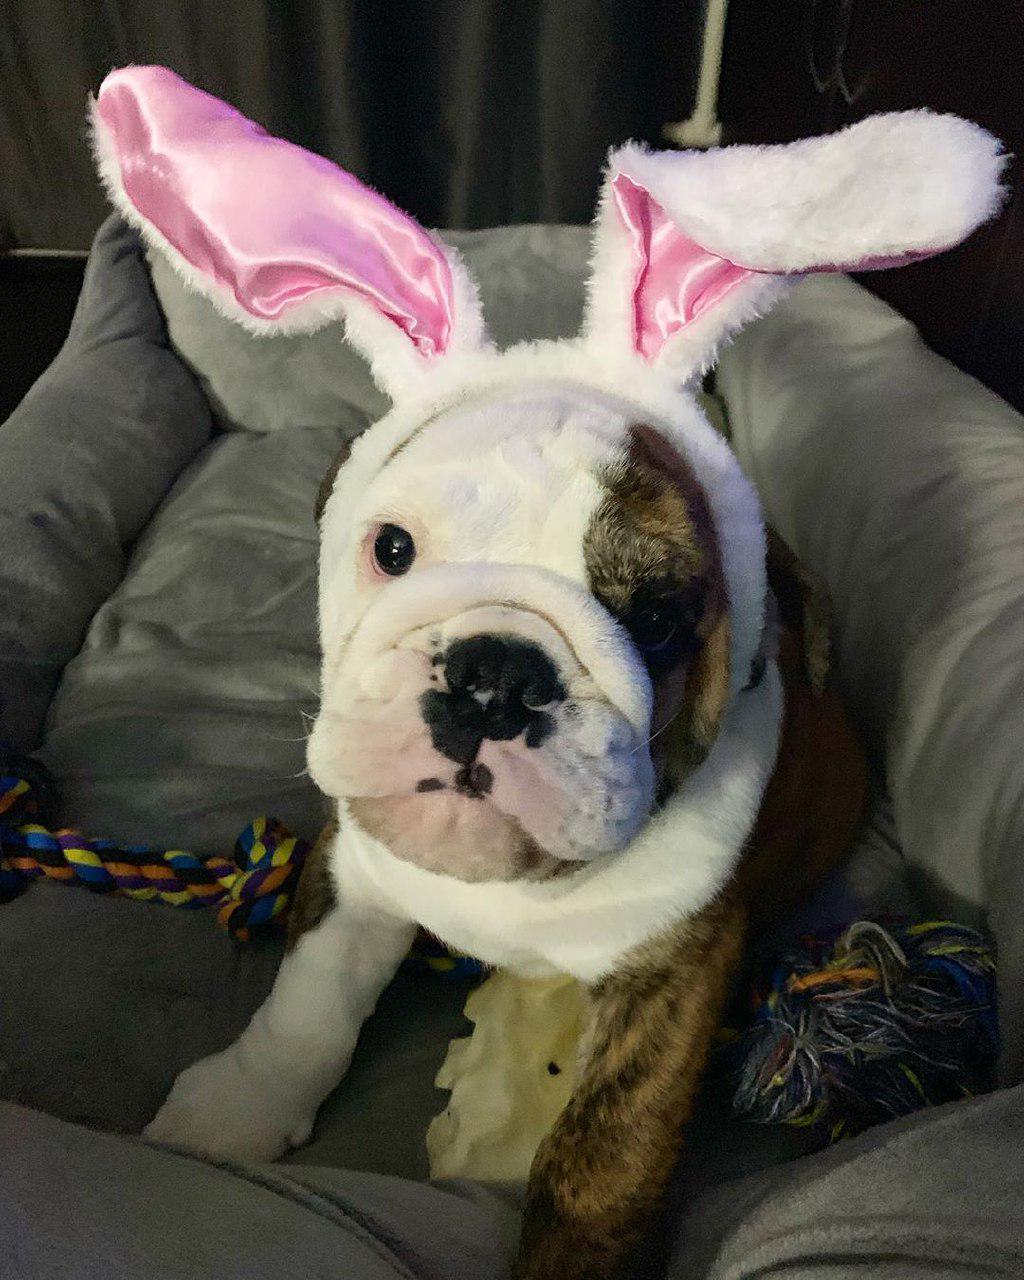 An English Bulldog wearing bunny ears headpiece while sitting on its bed